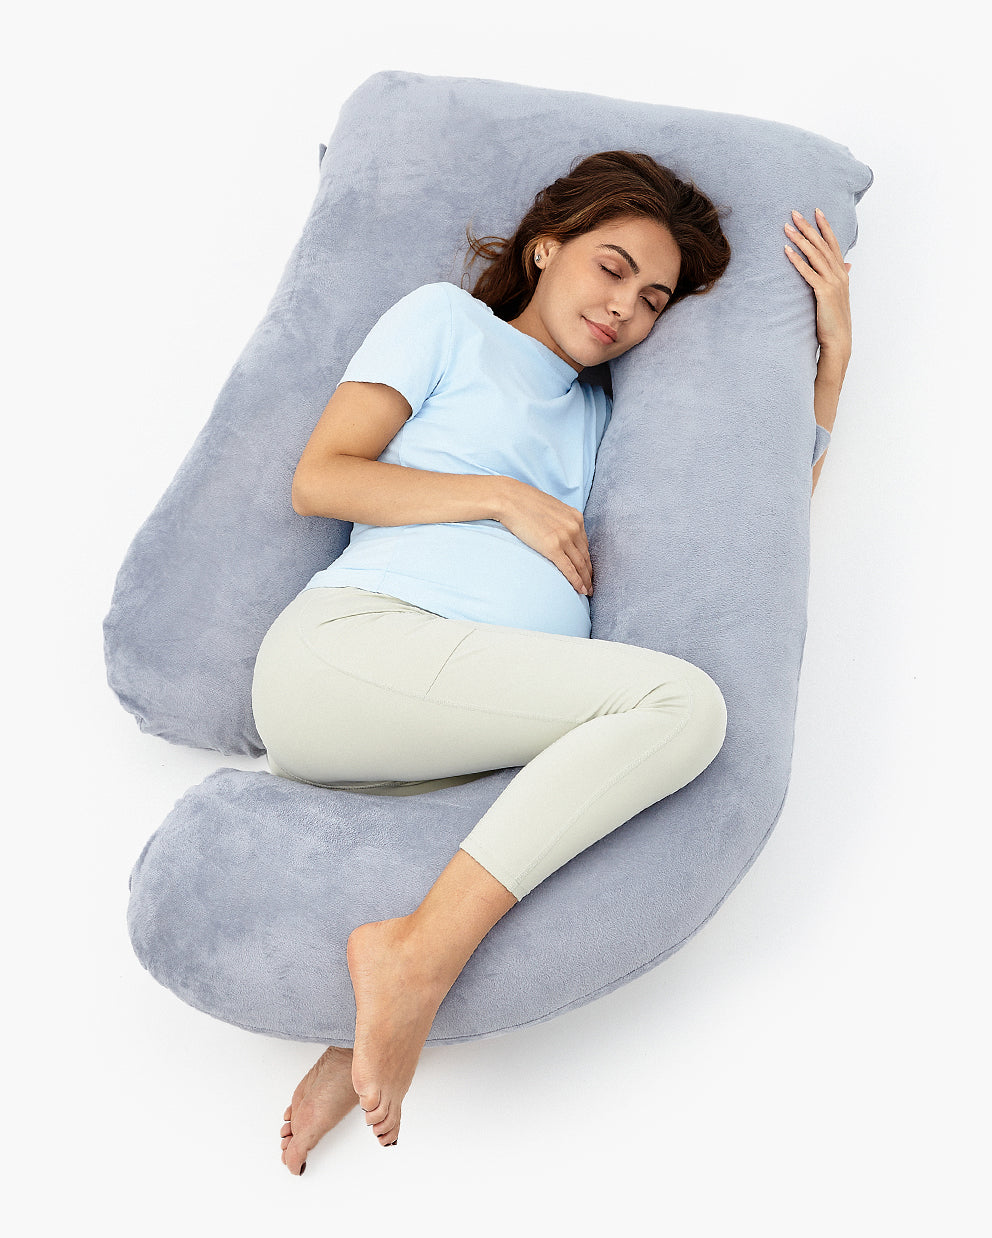 Momcozy U Maternity Pillow,Maternity Body Pillows for Pregnant Women  Sleeping with Jersey Cotton Cover 